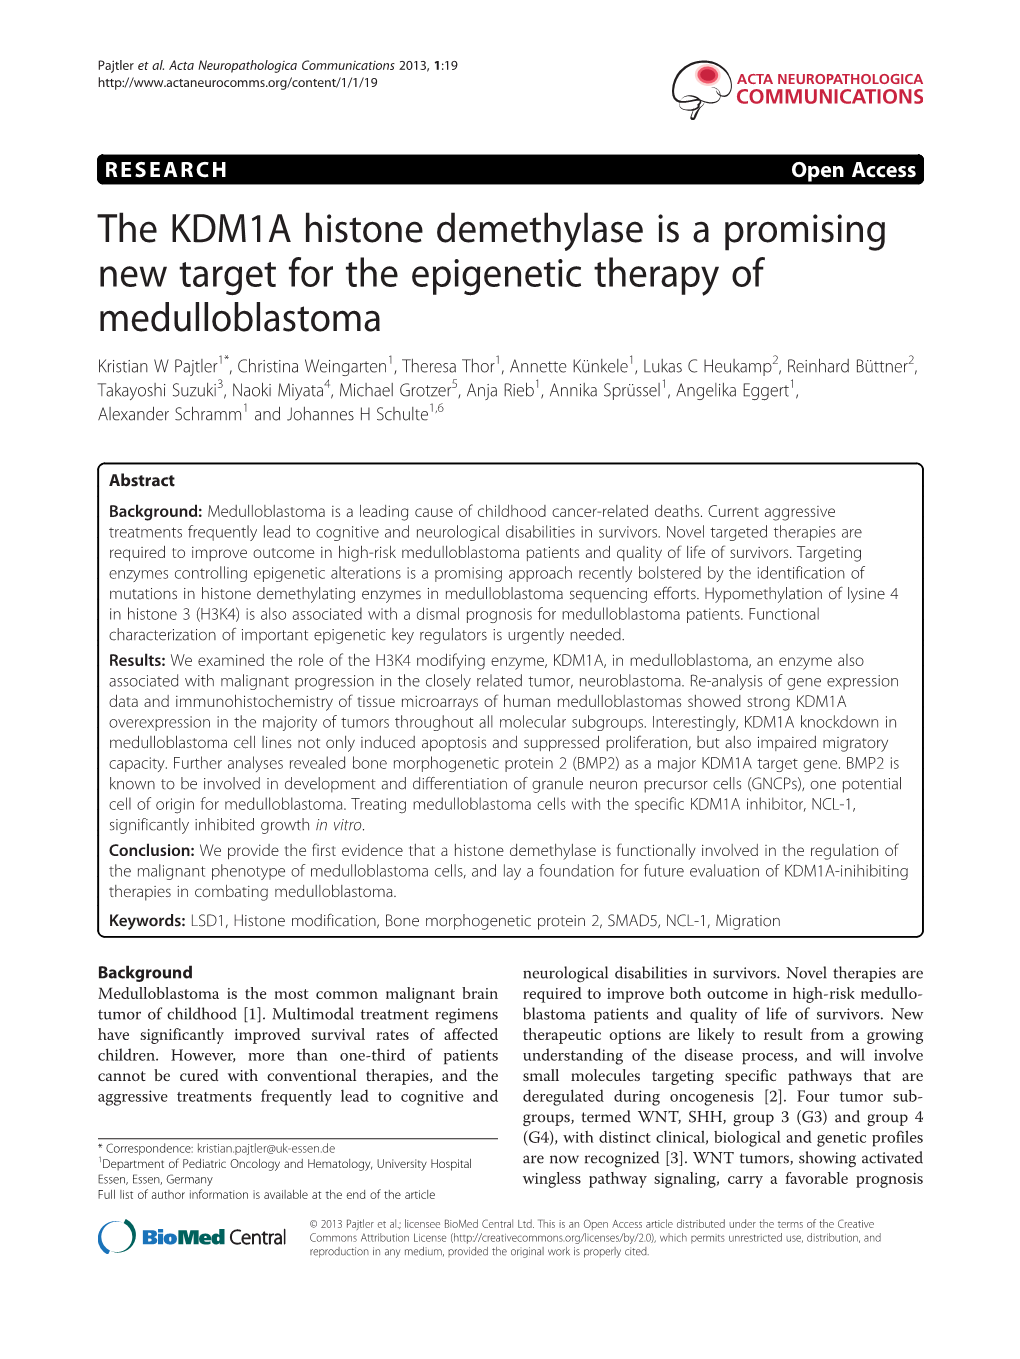 The KDM1A Histone Demethylase Is a Promising New Target for the Epigenetic Therapy of Medulloblastoma